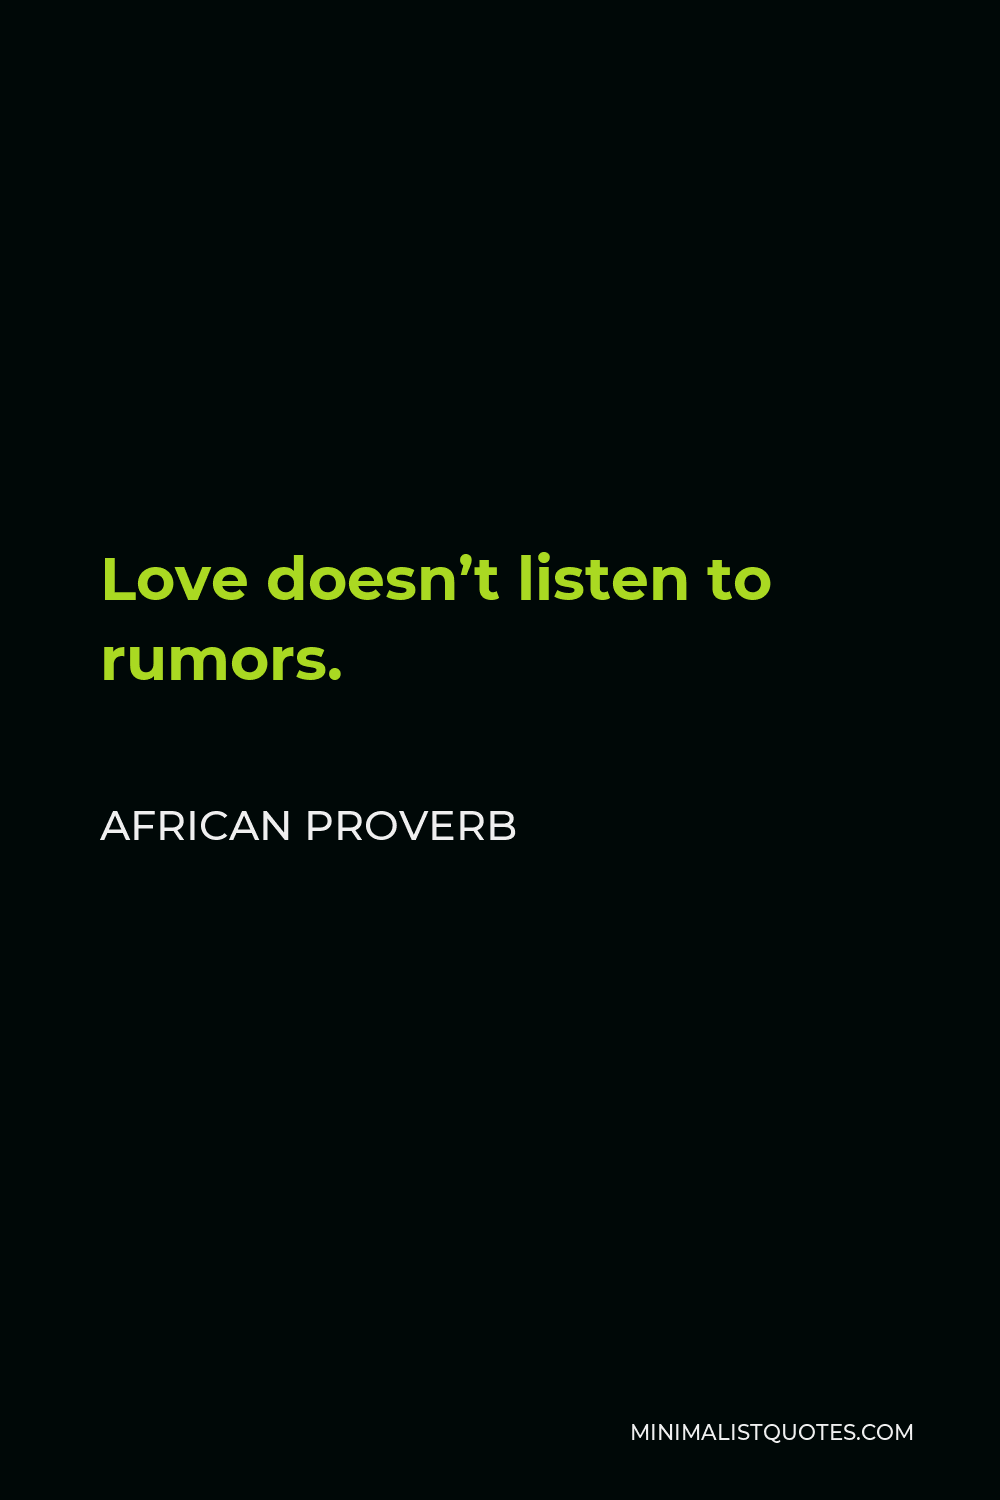 African Proverb Quote - Love doesn’t listen to rumors.